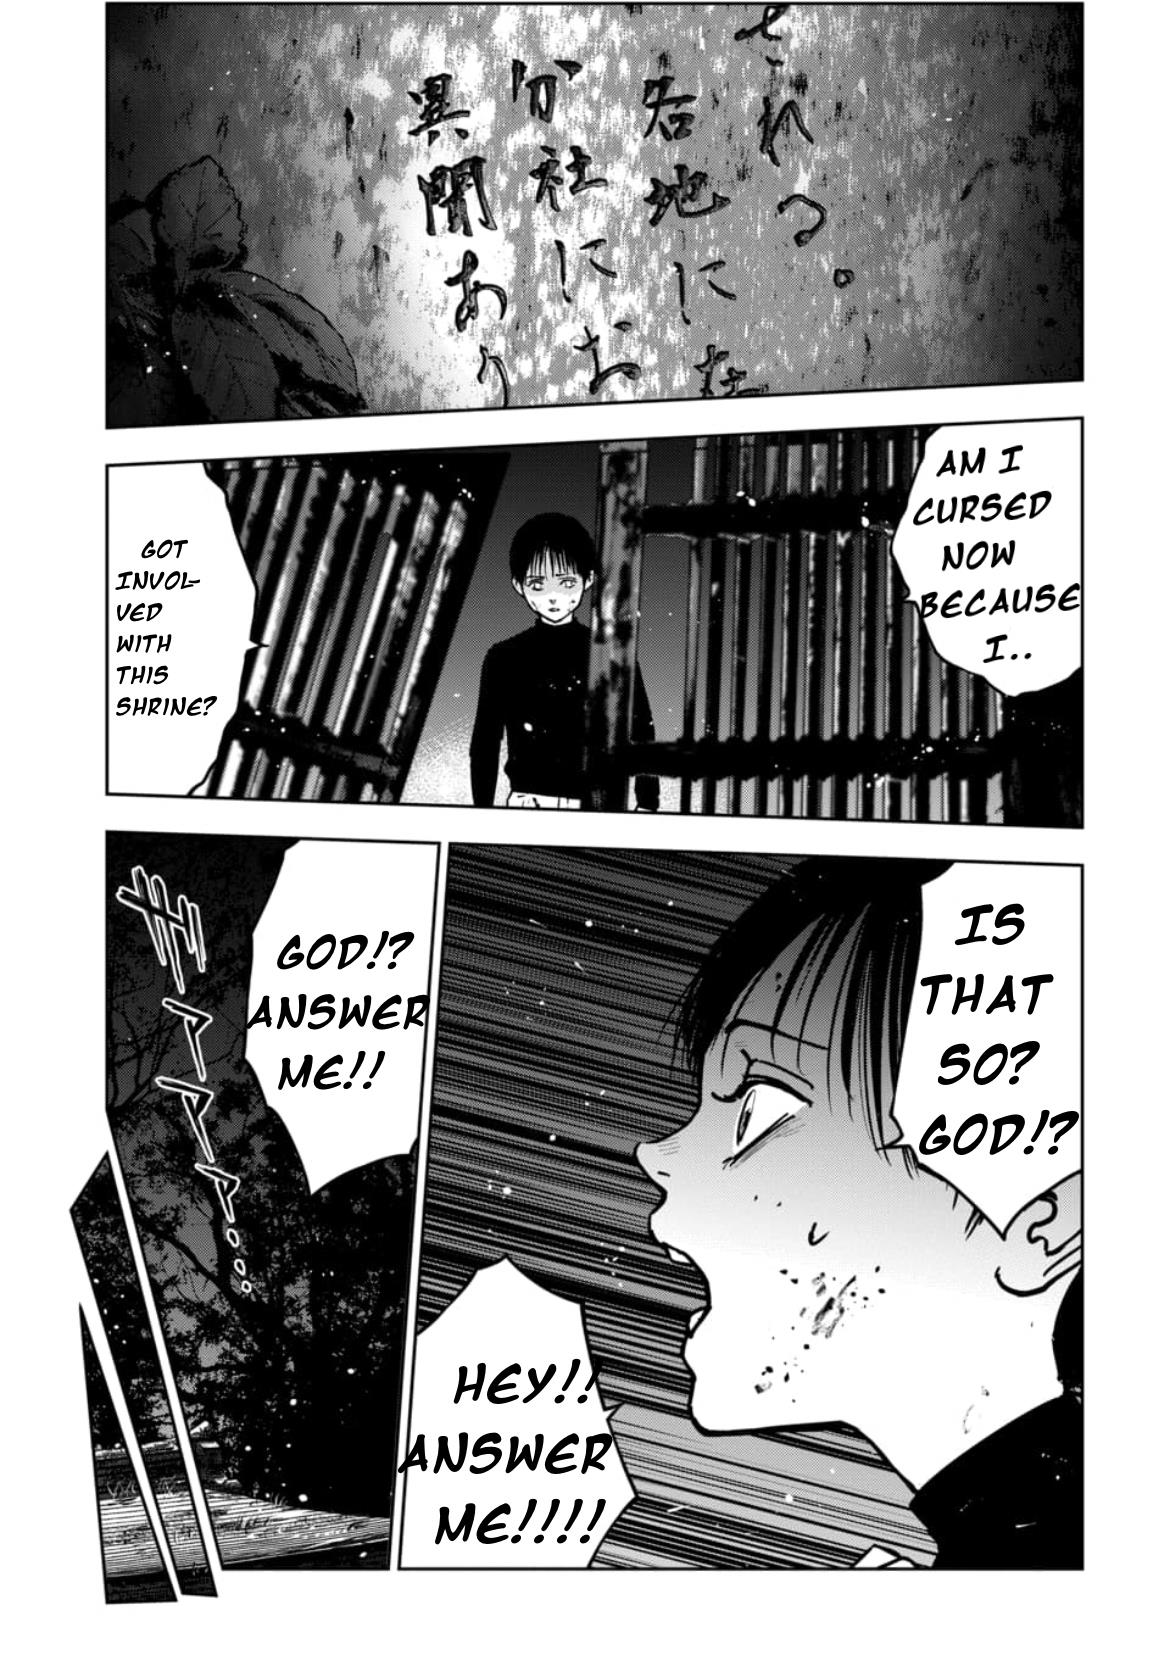 Massacre Happy Ending - Chapter Of Blue - Vol.1 Chapter 4.1: Chapter 4 Page 4 Missing Page - Picture 3